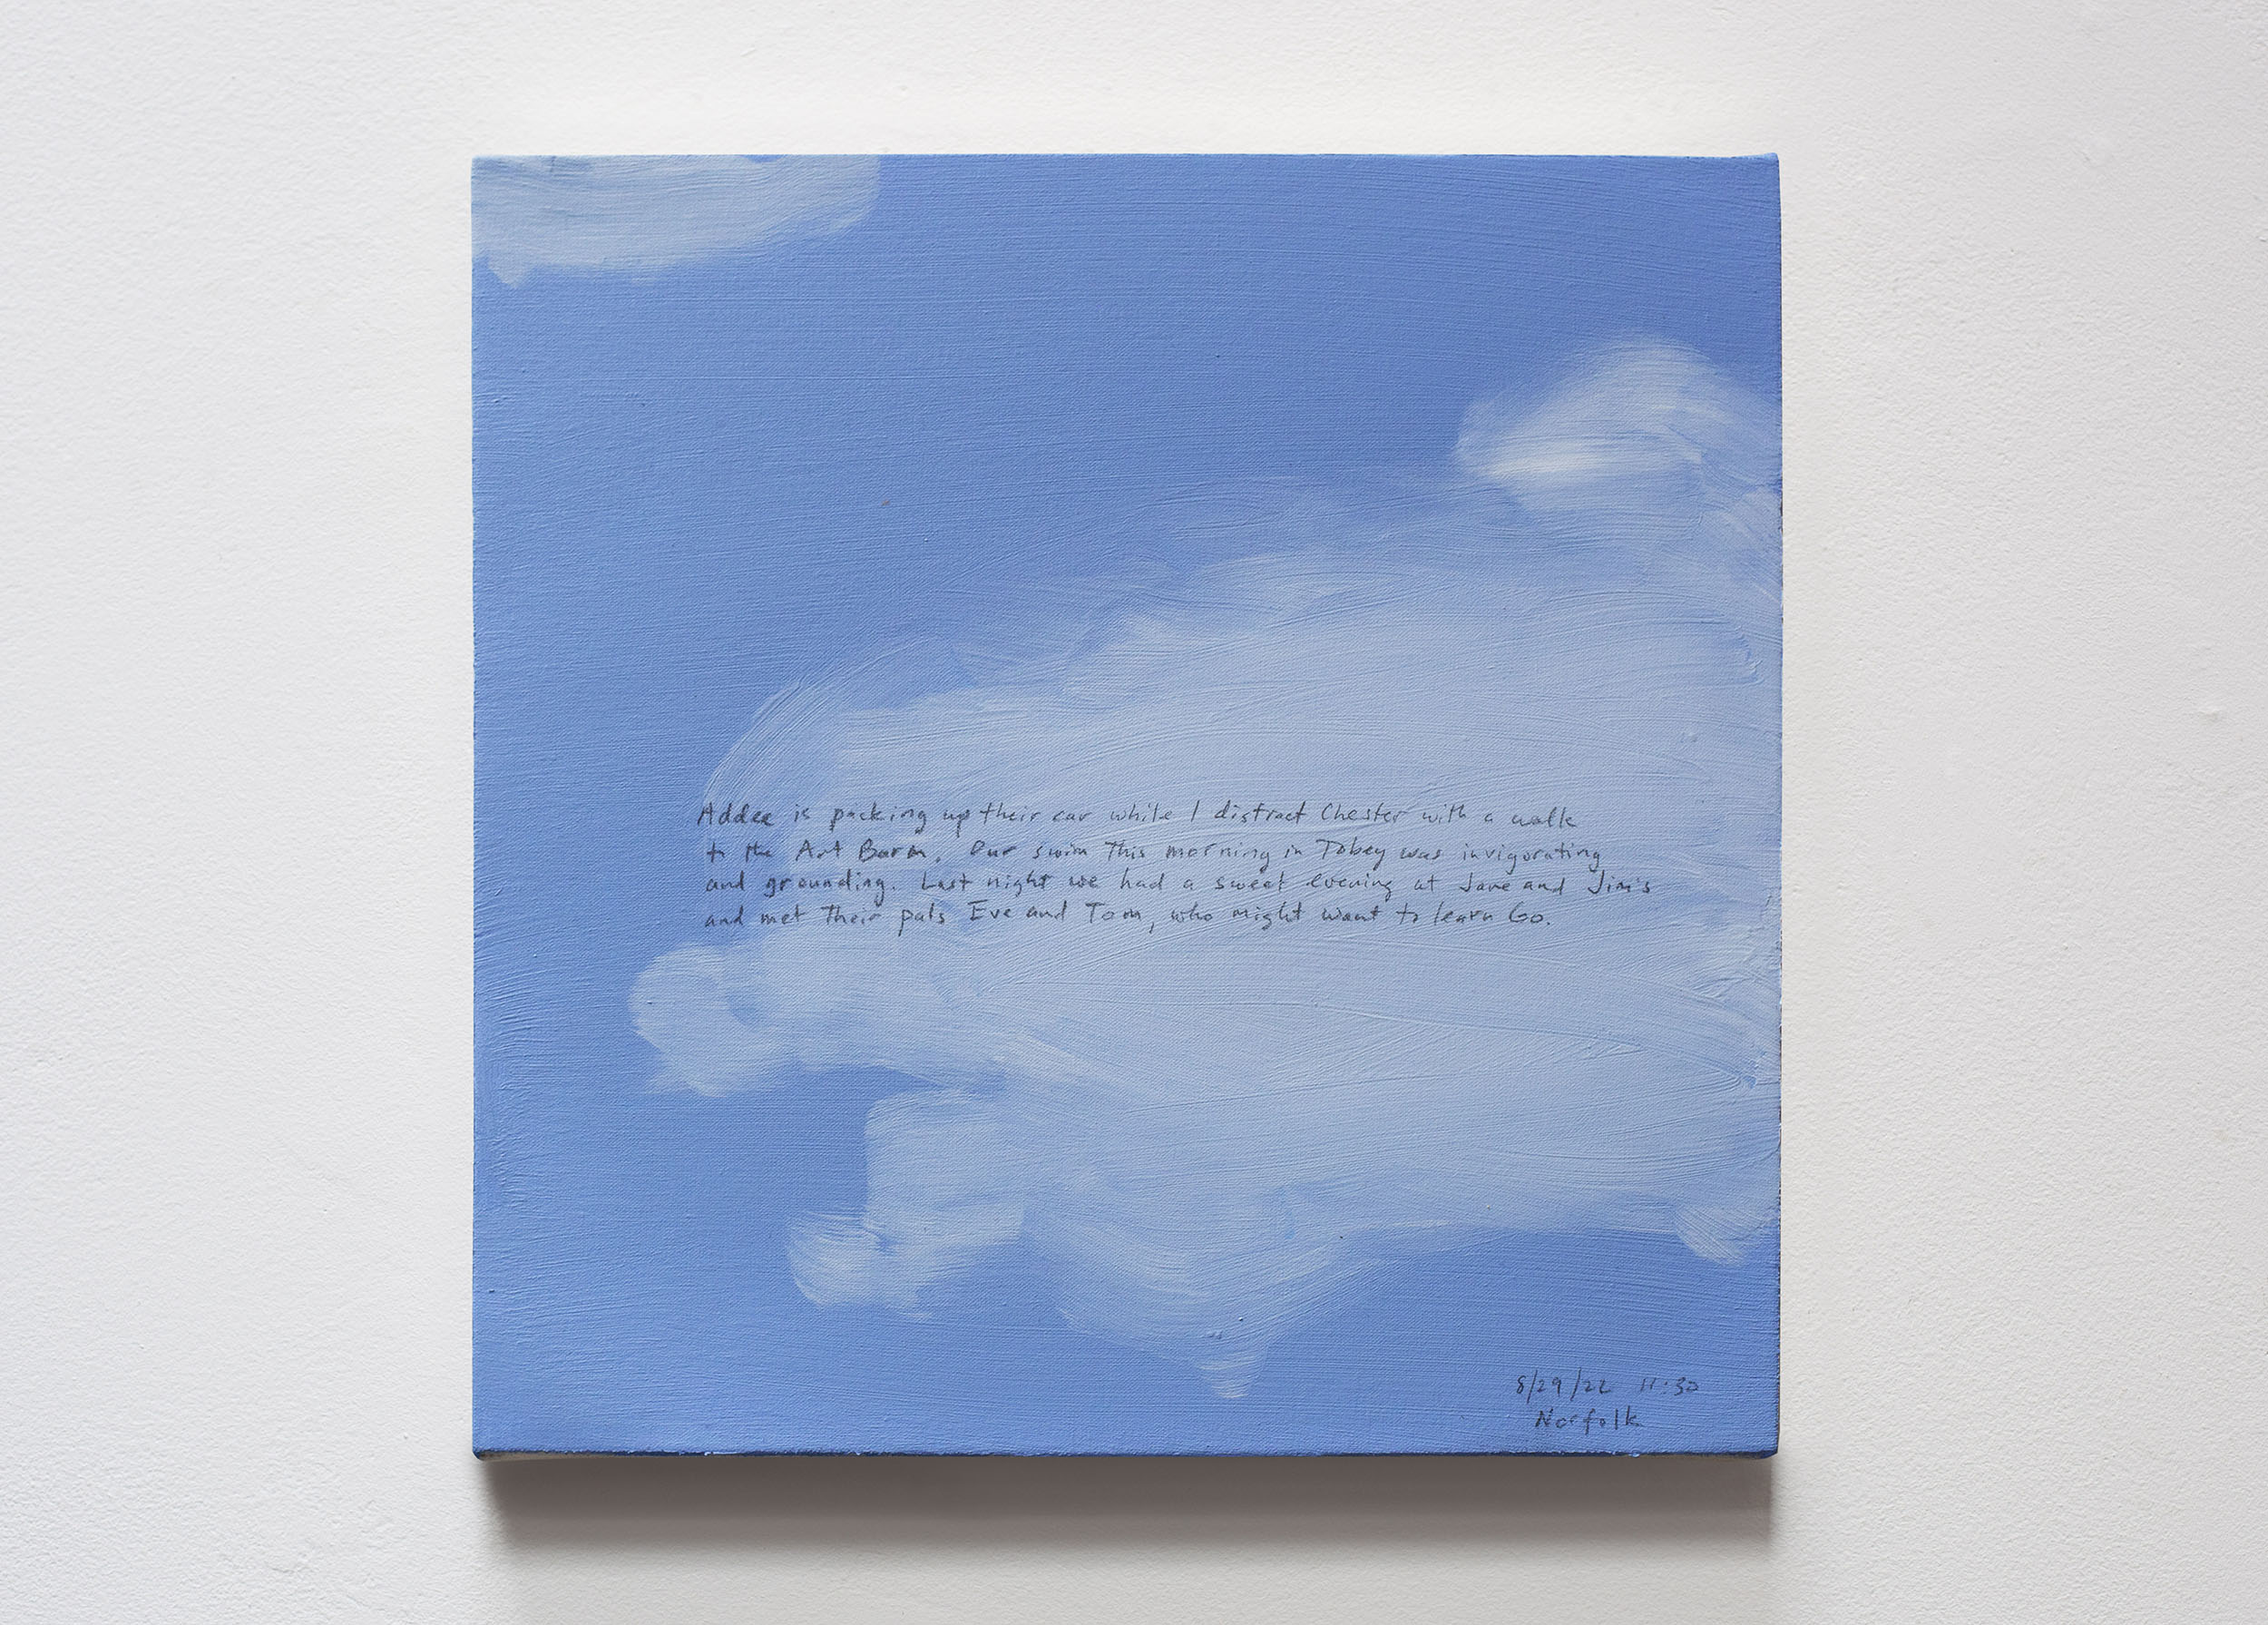 A 14 × 14 inch, acrylic painting of the sky. A journal entry is handwritten on the painting:

“Addee is packing up their car while I distract Chester with a walk to the Art Barn. Our swim this morning in Tobey was invigorating and grounding. Last night we had a sweet evening at Jane and Jim’s and met their pals Eve and Tom, who might want to learn Go.

8/29/22 11:30
Norfolk”